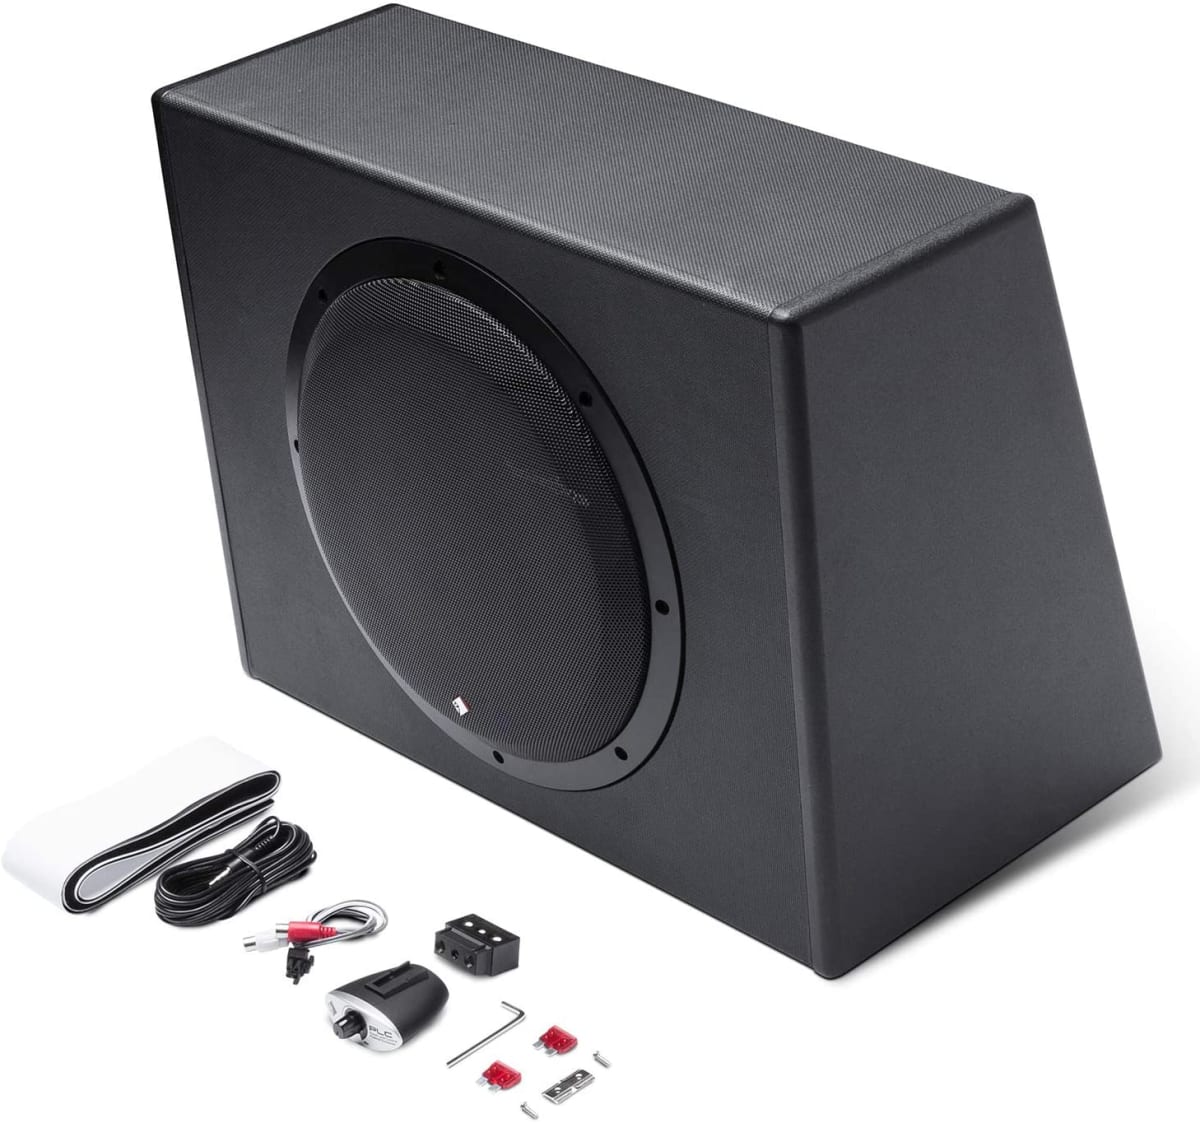 P300-12 Punch 300 Watt Powered Loaded 12-Inch Subwoofer Enclosure